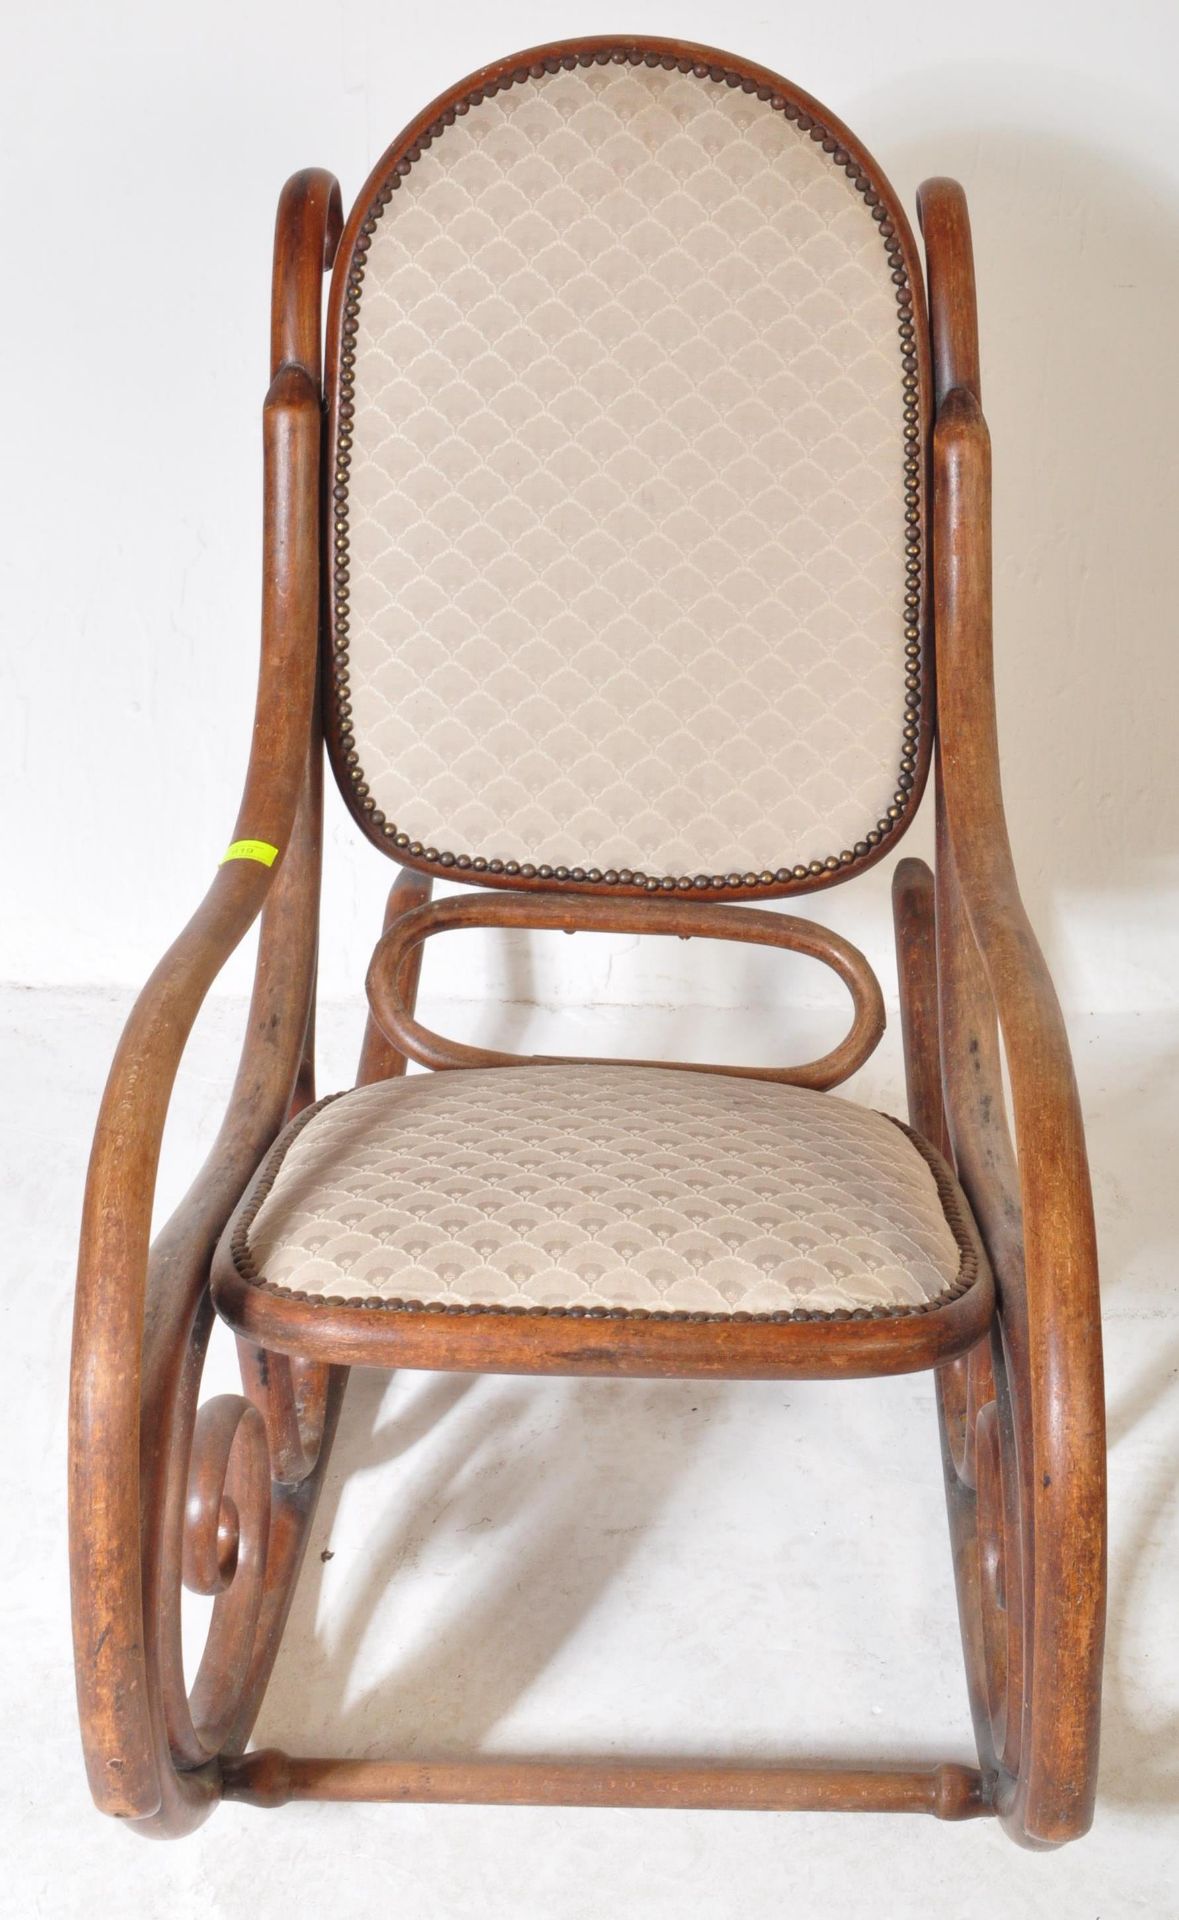 EARLY 20TH CENTURY BENTWOOD & CANE ROCKING CHAIR - Image 2 of 3